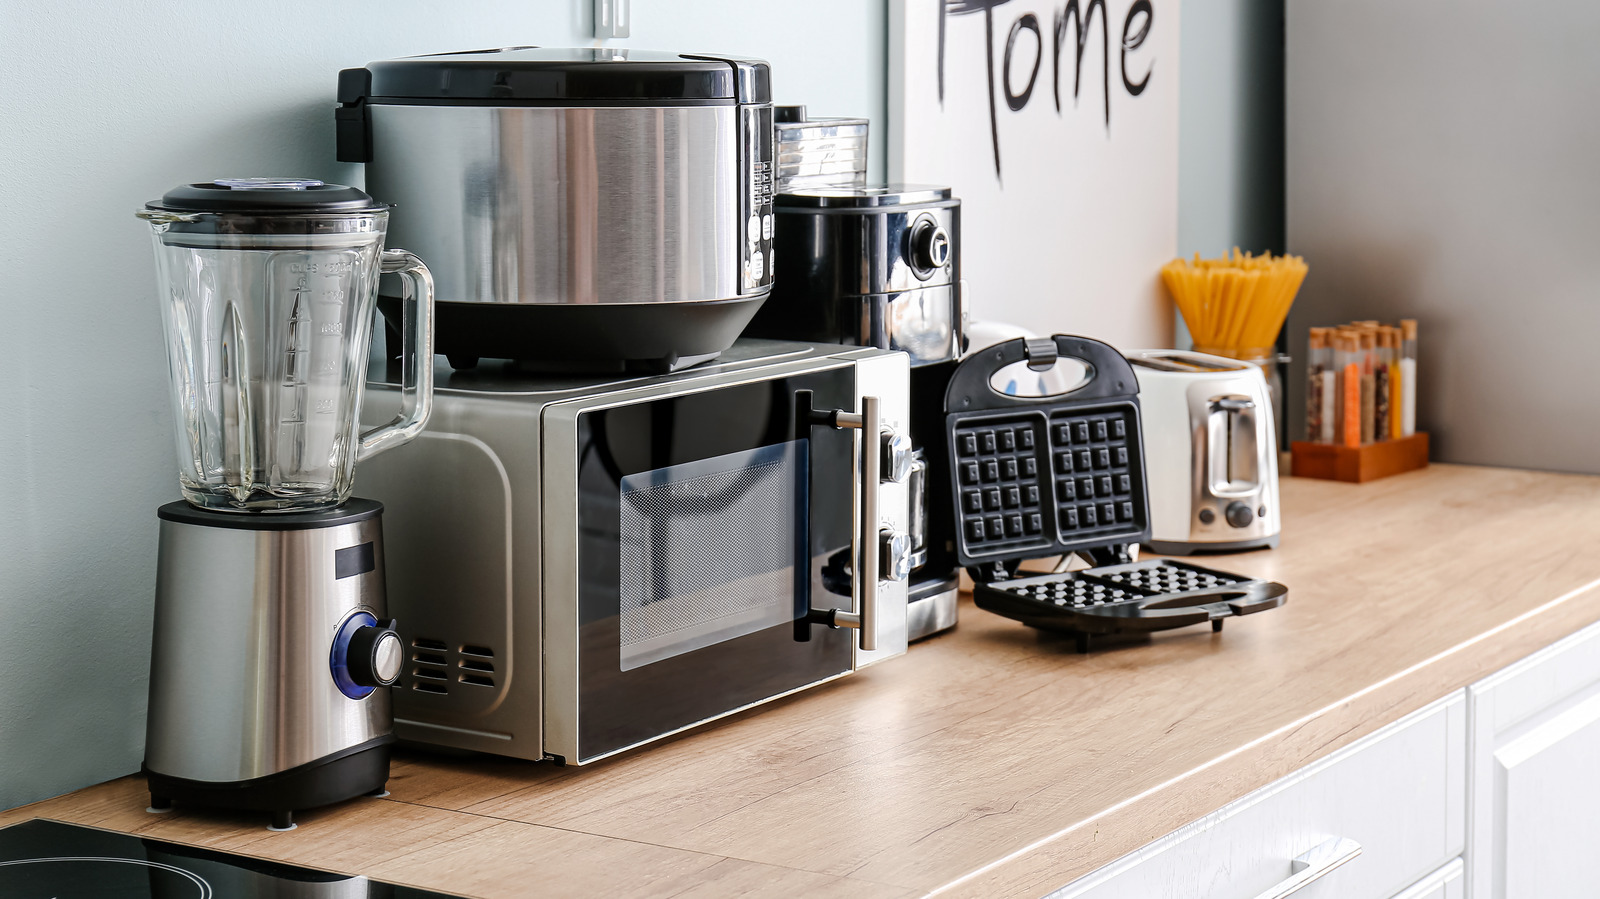 These are the kitchen appliances + gadgets we're so happy to have right now